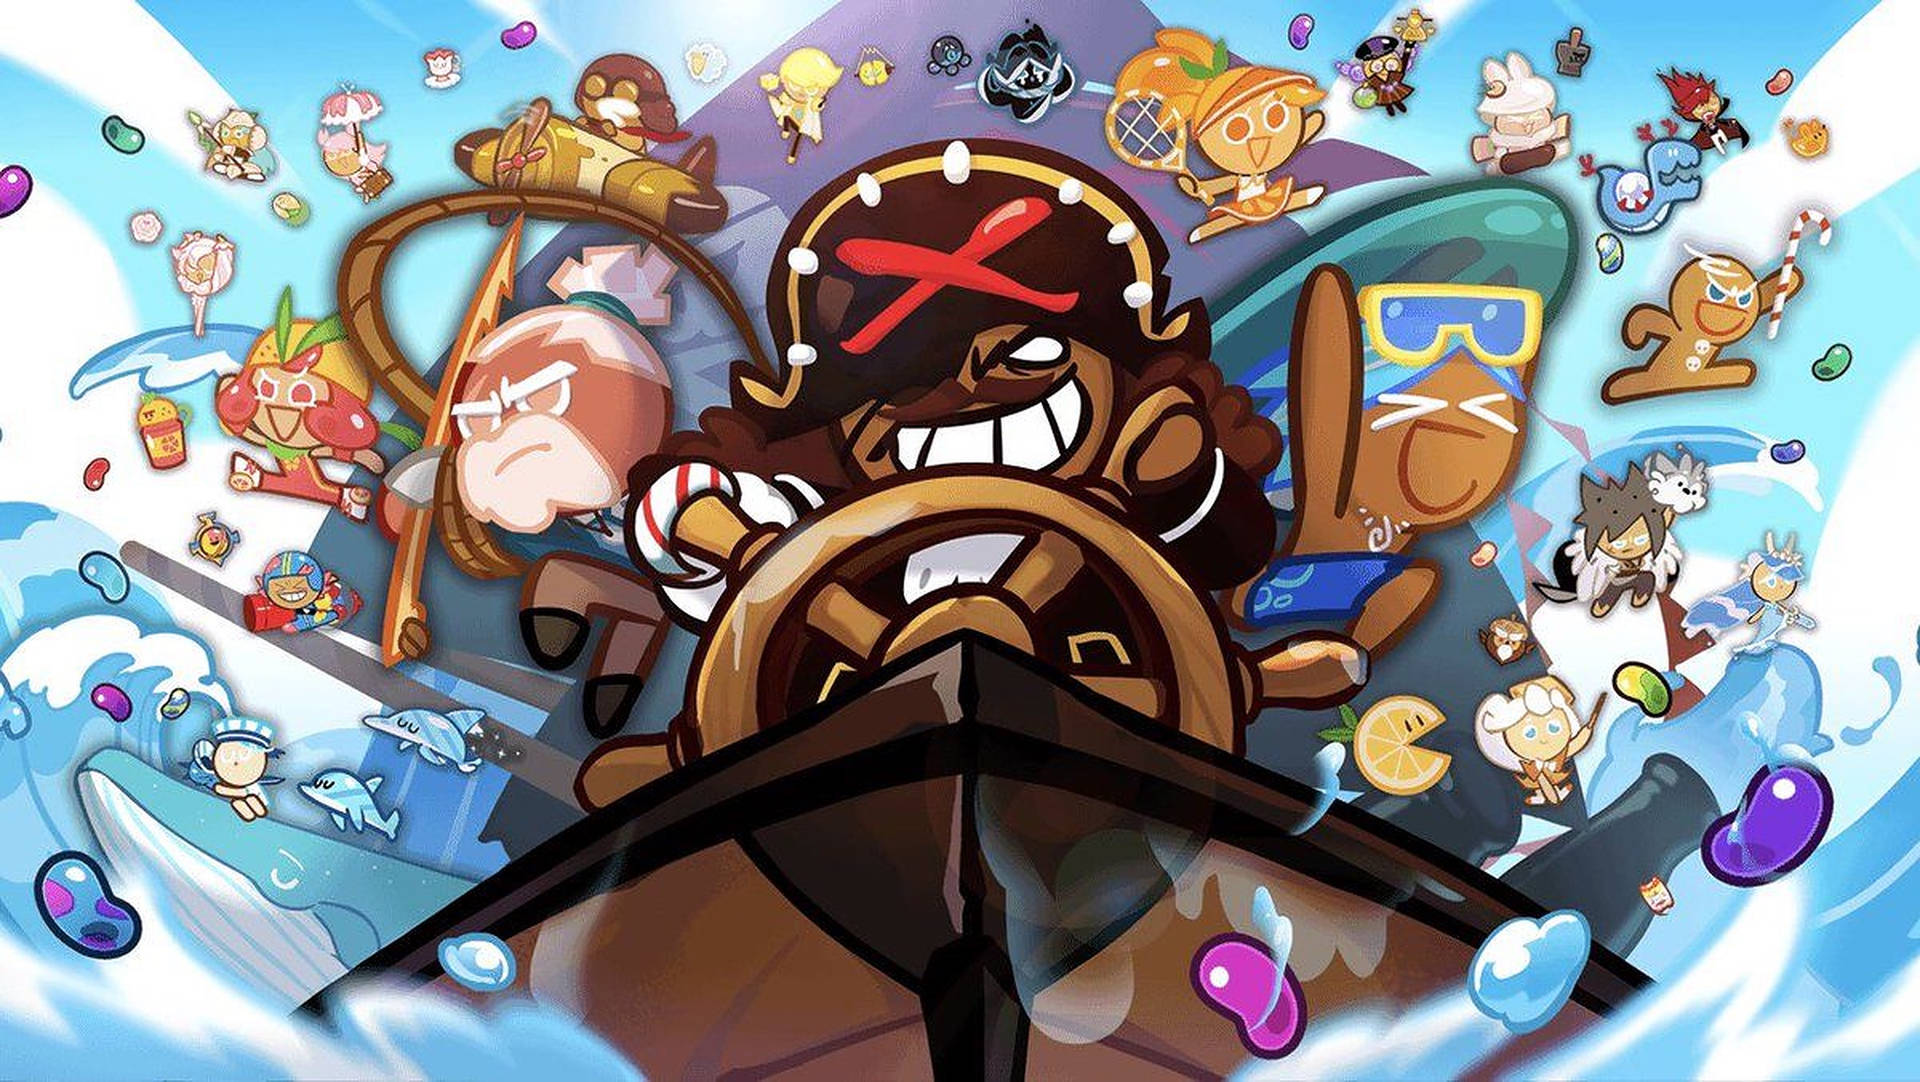 Exciting Adventures In The Cookie Run World With Pirate Ship Background